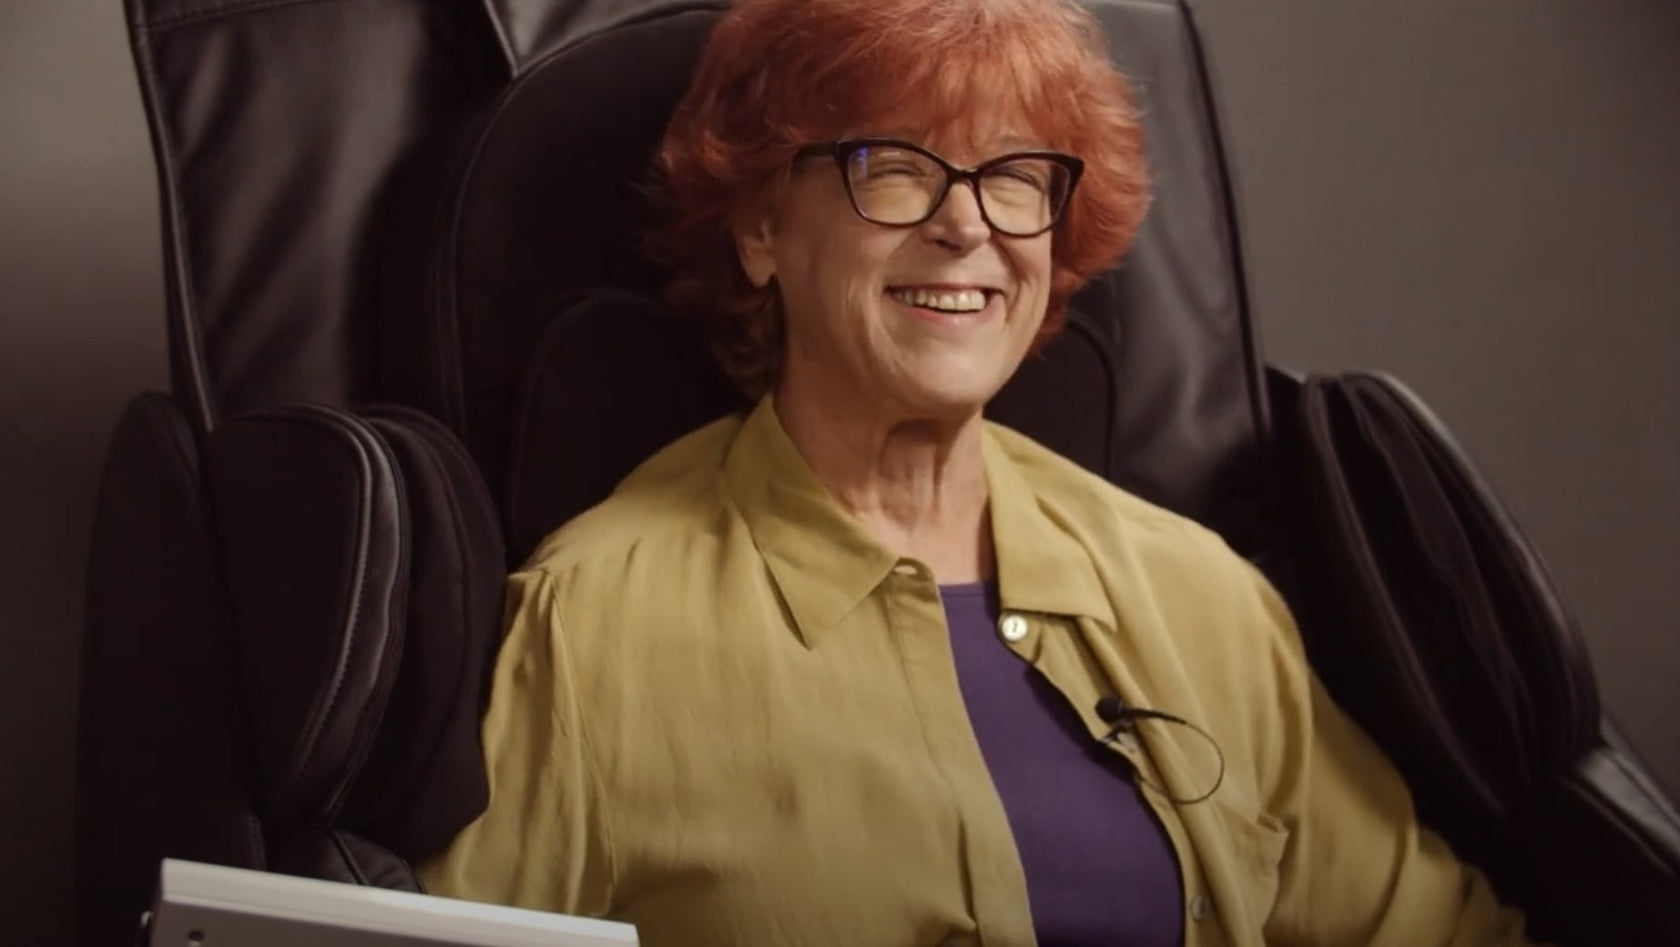 woman smiling in joy while using the medical breakthrough massage chair